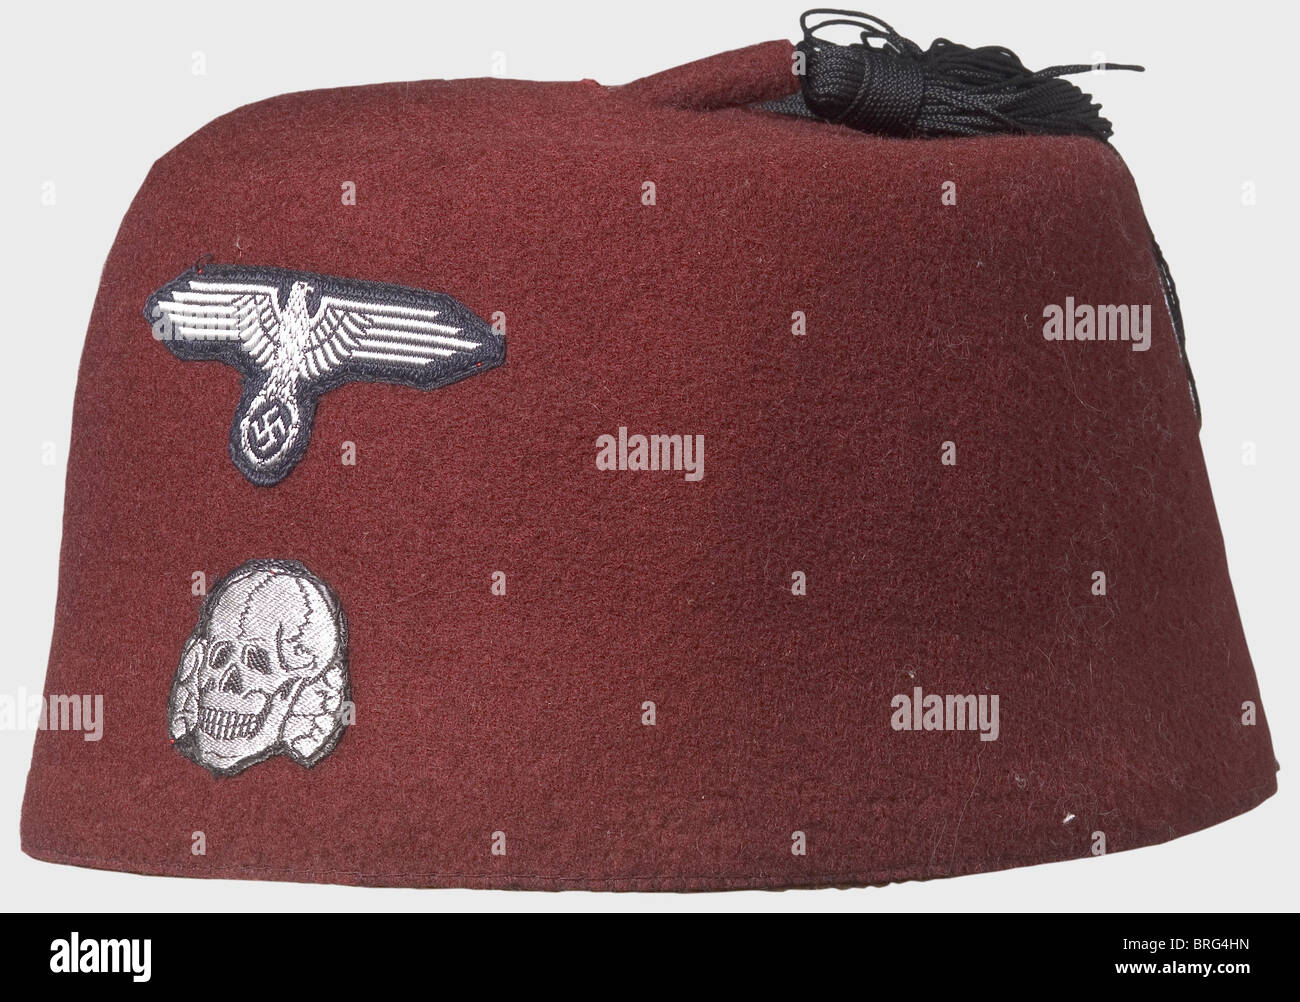 A fez for the dress uniform, for a Moslem Unit. Red felt with a black silk tassel and machine sewn BeVo insignia (silver-grey on black backing). Leather sweatband. historic, historical, 1930s, 20th century, Waffen-SS, armed division of the SS, armed service, armed services, NS, National Socialism, Nazism, Third Reich, German Reich, Germany, military, militaria, utensil, piece of equipment, utensils, object, objects, stills, clipping, clippings, cut out, cut-out, cut-outs, fascism, fascistic, National Socialist, Nazi, Nazi period, Additional-Rights-Clearences-Not Available Stock Photo